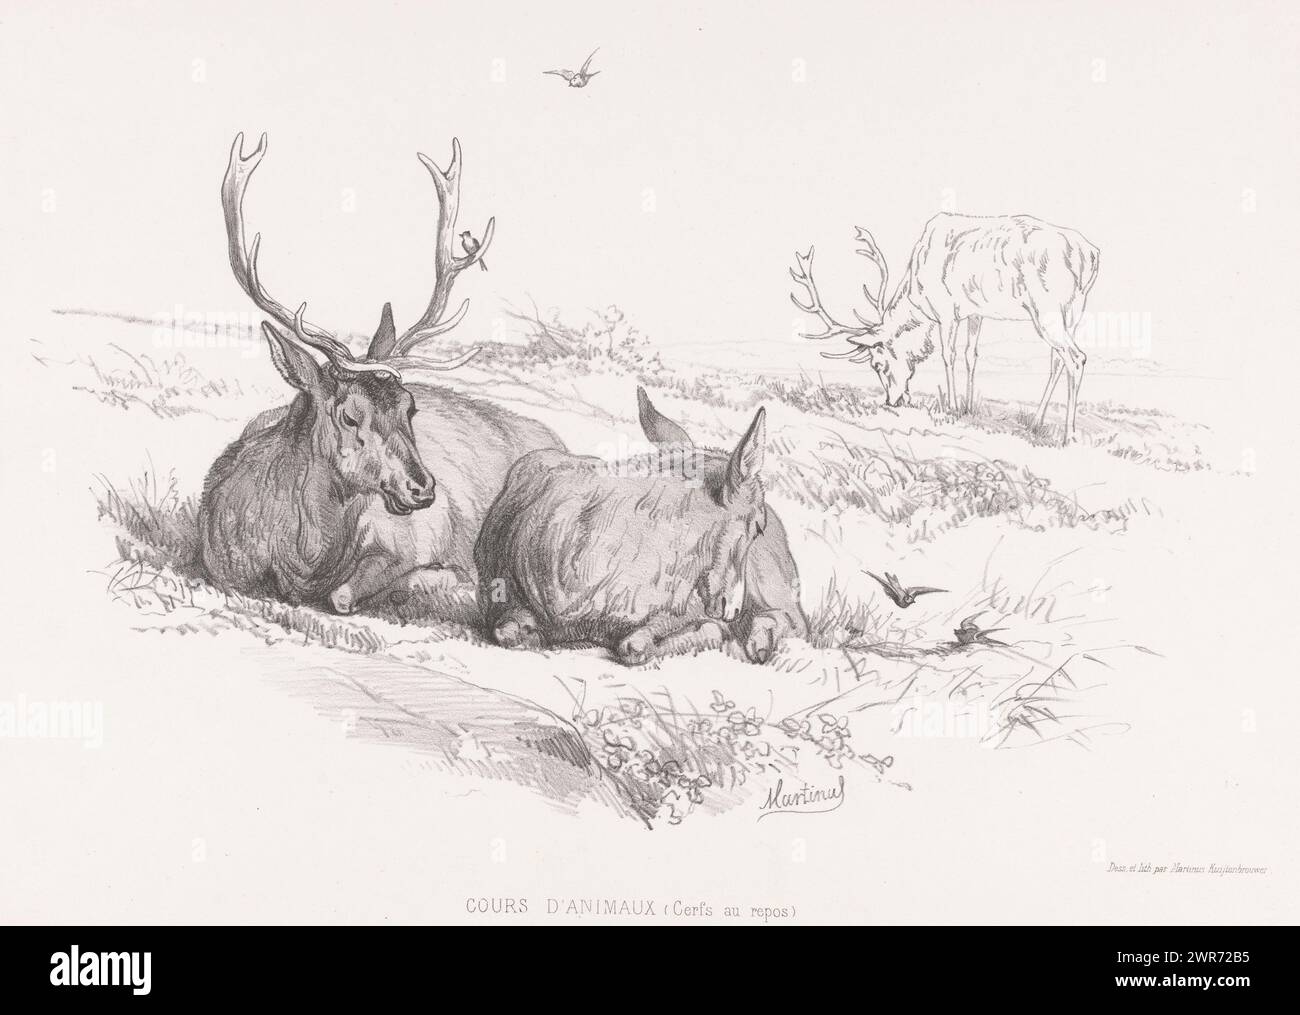 Resting deer, Cerfs au repos (title on object), Cours d'animaux (series title on object), There is a bird in the antlers of the male. Numbered bottom center: 7., print maker: Martinus Antonius Kuytenbrouwer jr., after design by: Martinus Antonius Kuytenbrouwer jr., printer: Joseph Rose Lemercier, Paris, in or before 1860, paper, height 320 mm × width 490 mm, print Stock Photo